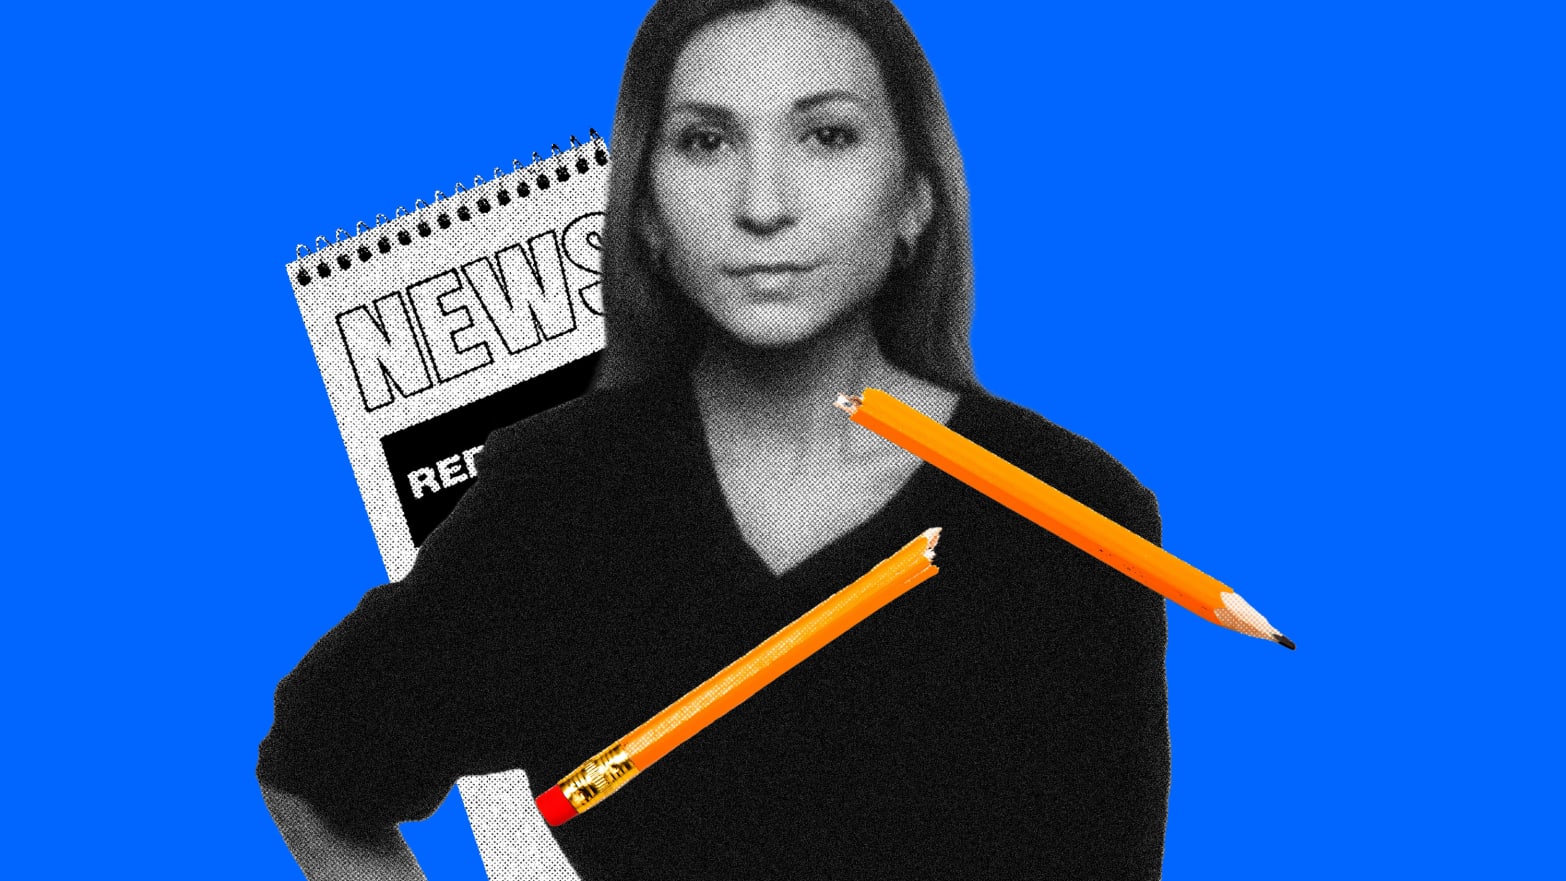 A photo illustration of Victoria Roshchyna with a broken pencil in the foreground